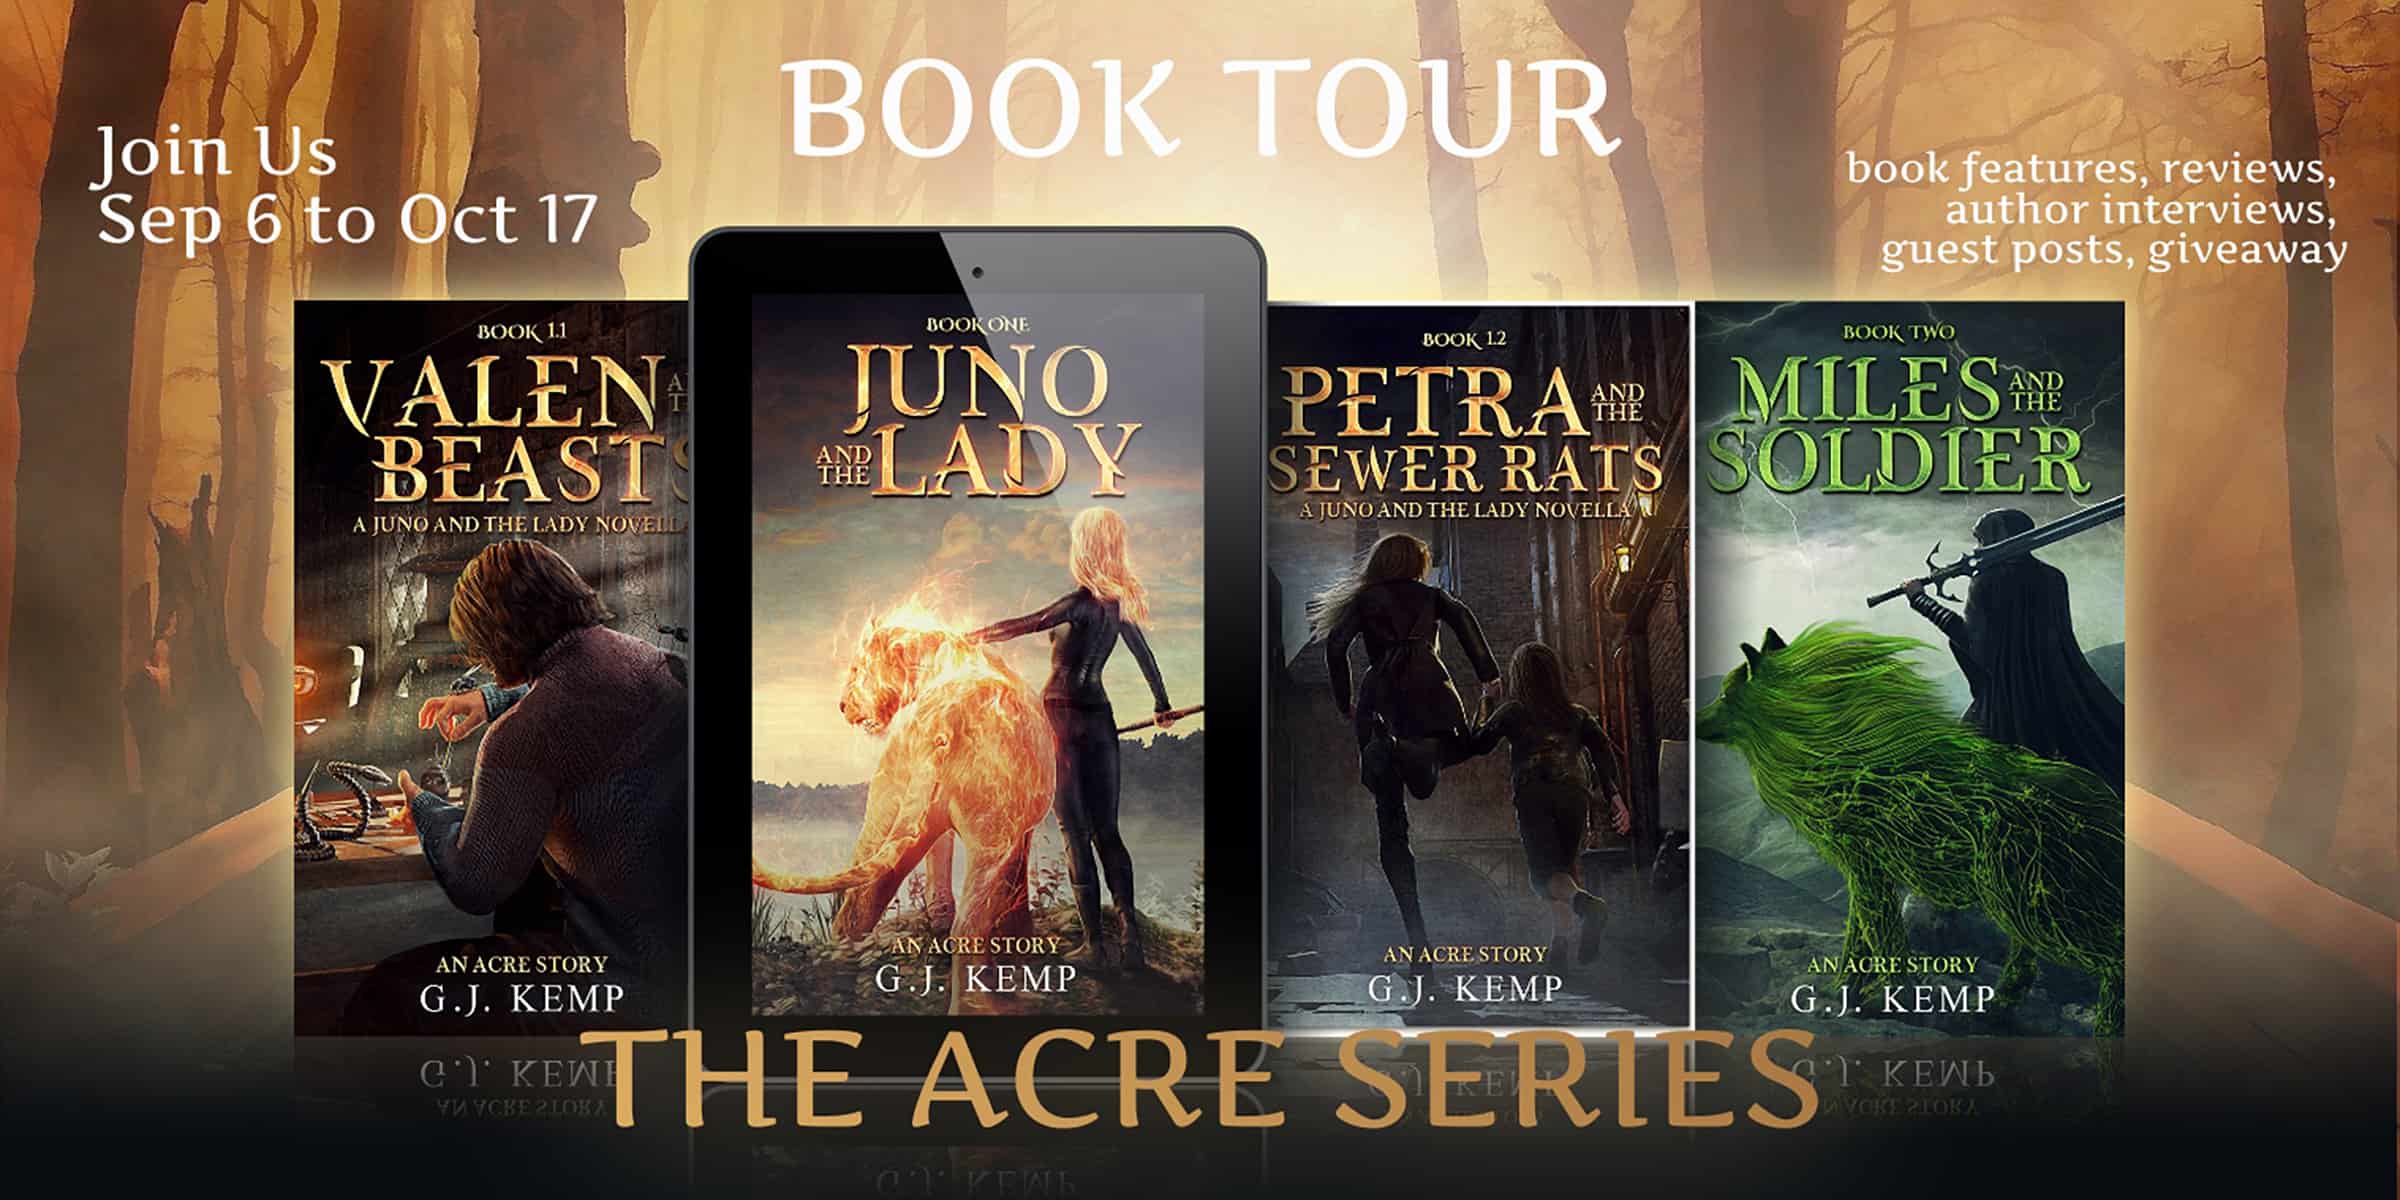 Petra and the Sewer Rats: A Juno and the Lady Novella (An Acre Story Book 1.2) by G.J. Kemp | Review and Giveaway